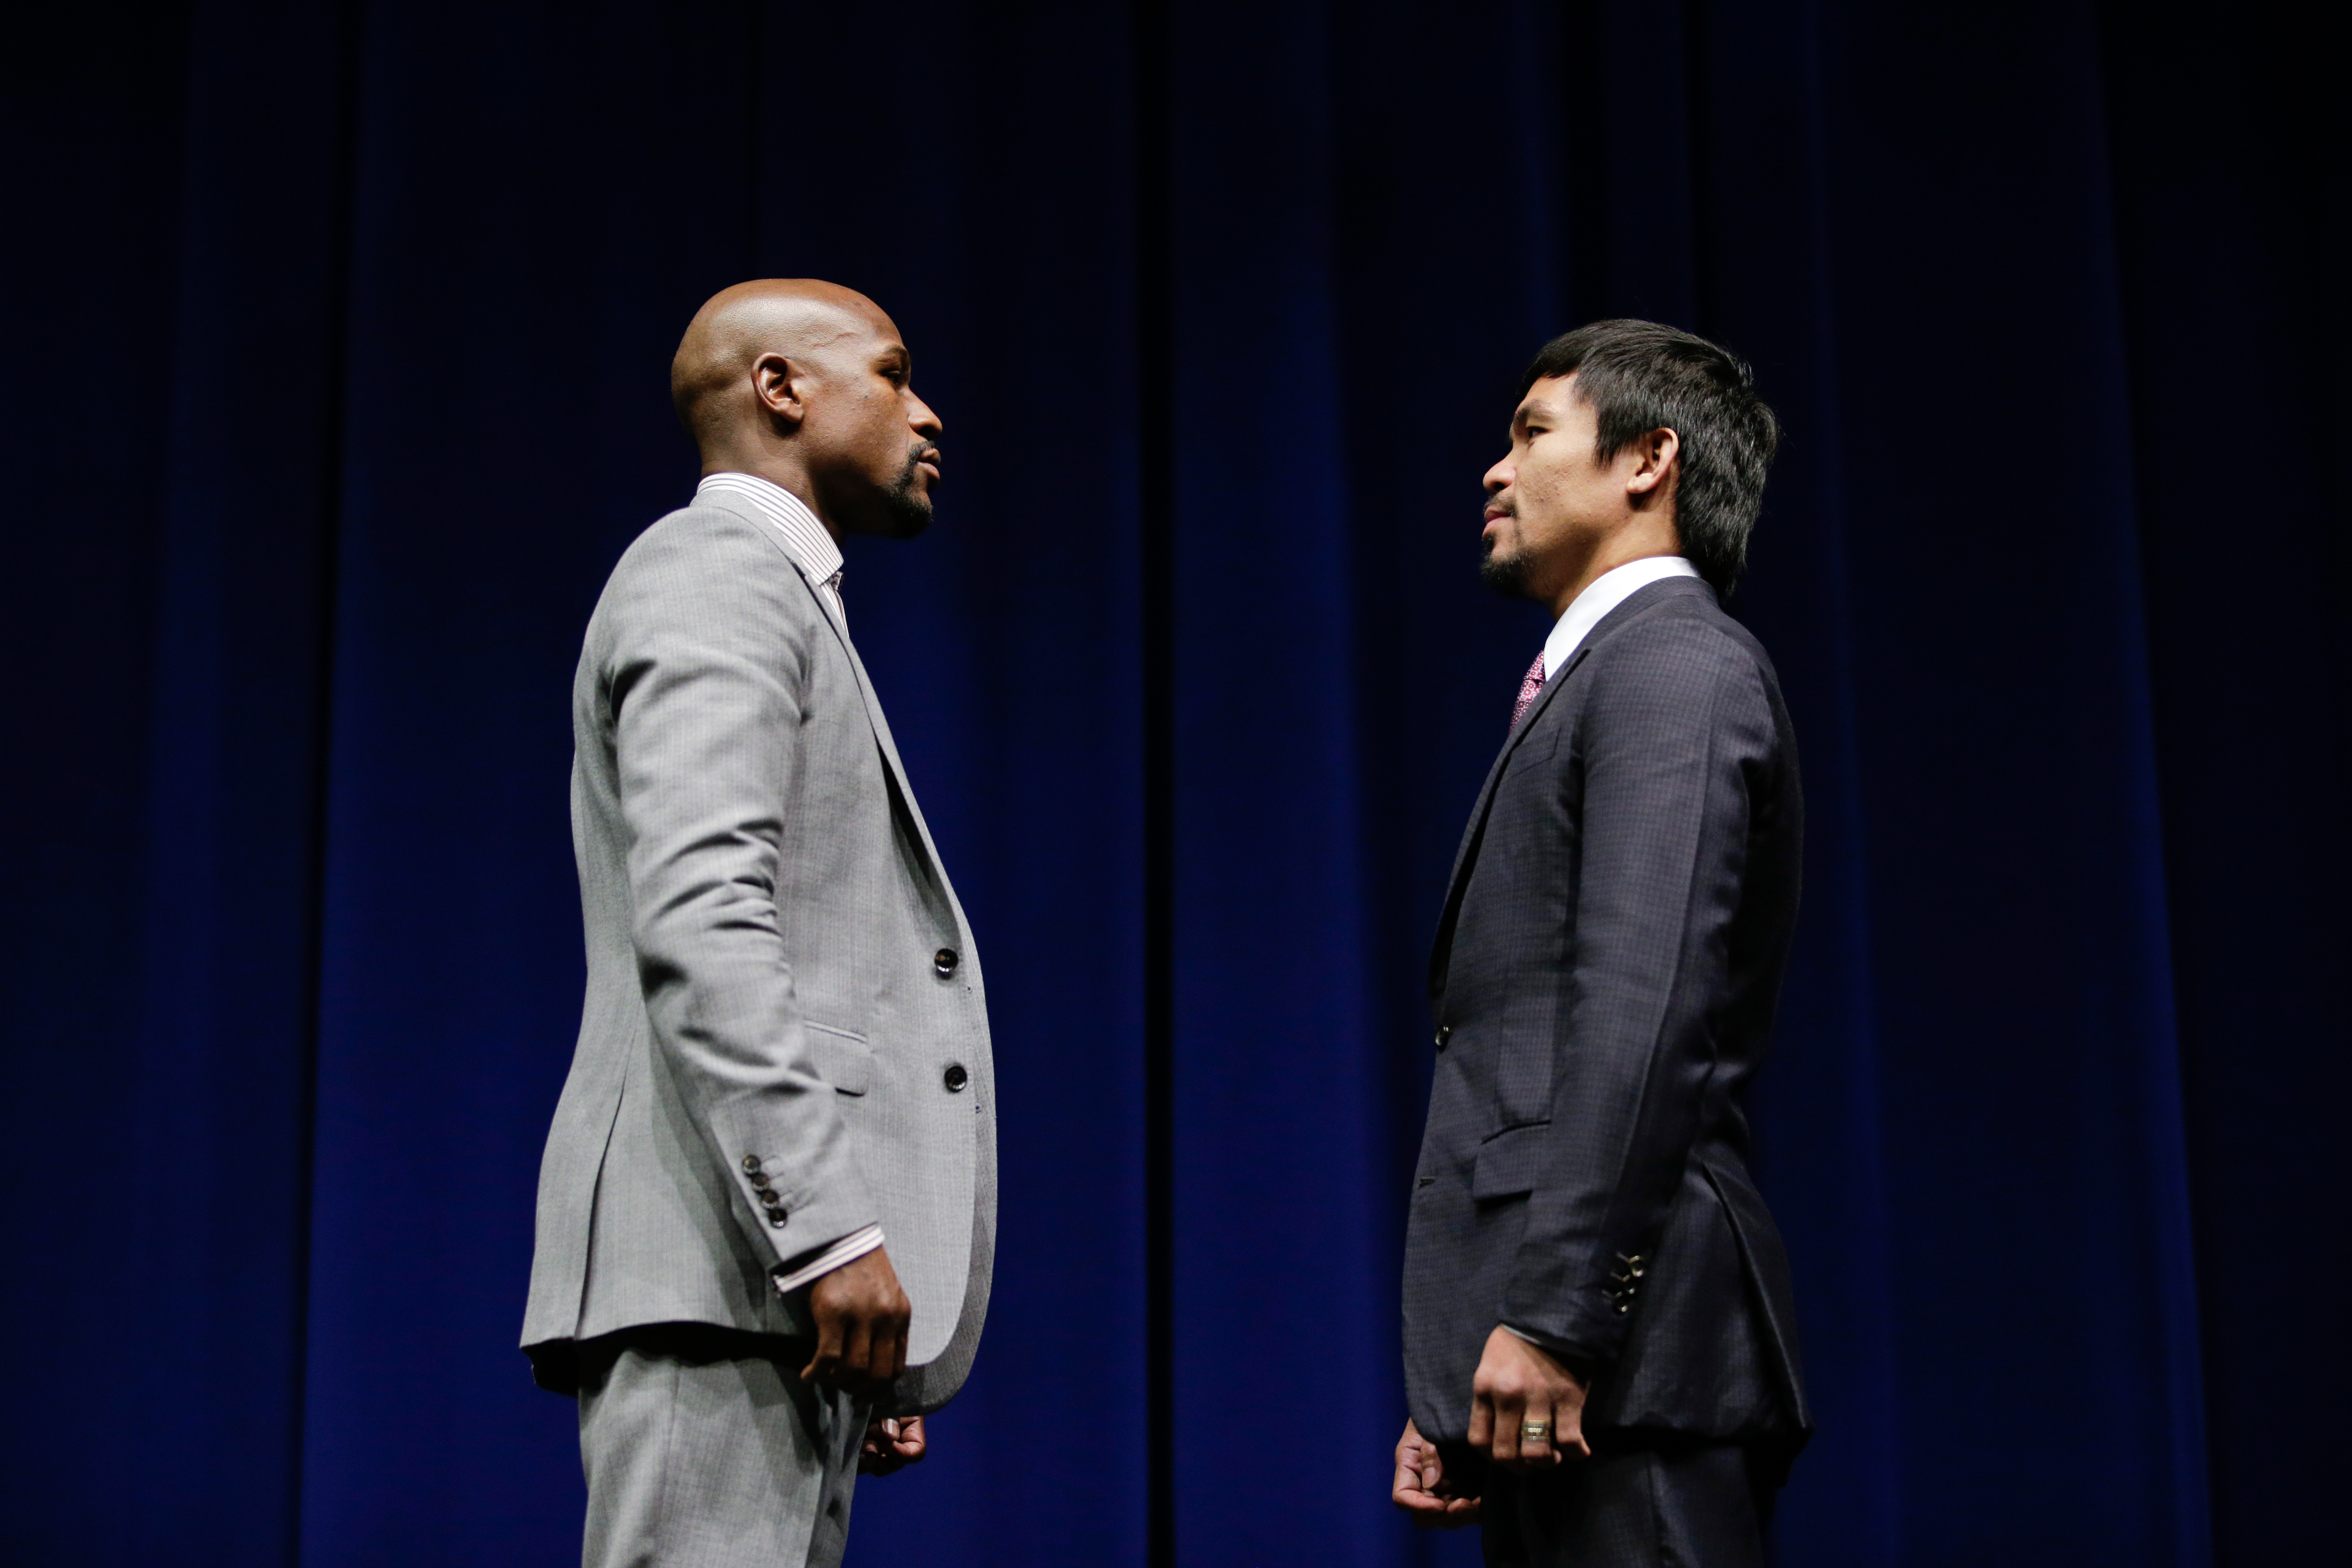 Boxers Floyd Mayweather Jr., left, and Manny Pacquiao, of the Philippines, pose for photos during a news conference, Wednesday, March 11, 2015, in Los Angeles. The two are scheduled to fight in Las Vegas on May 2.